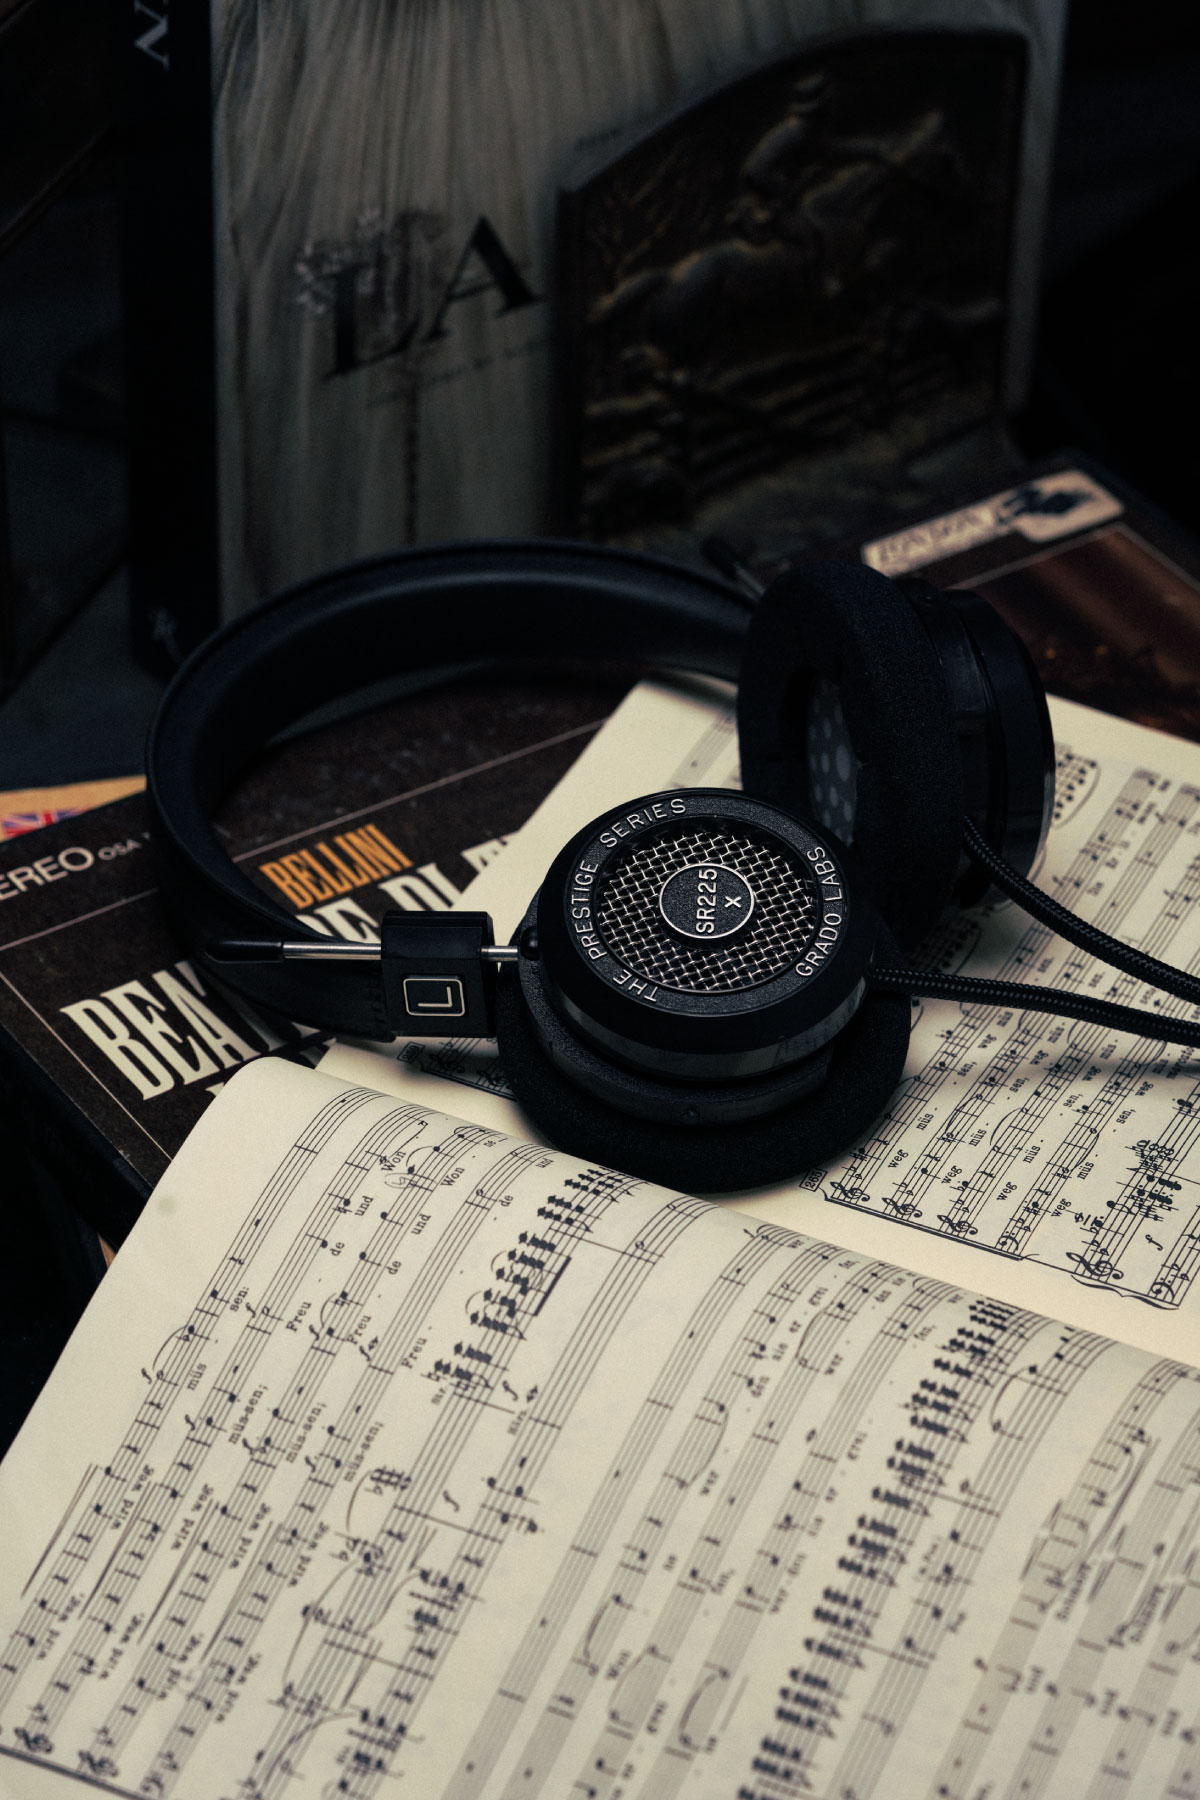 Photo of sr225x headphones resting on top of an open book with musical notation.